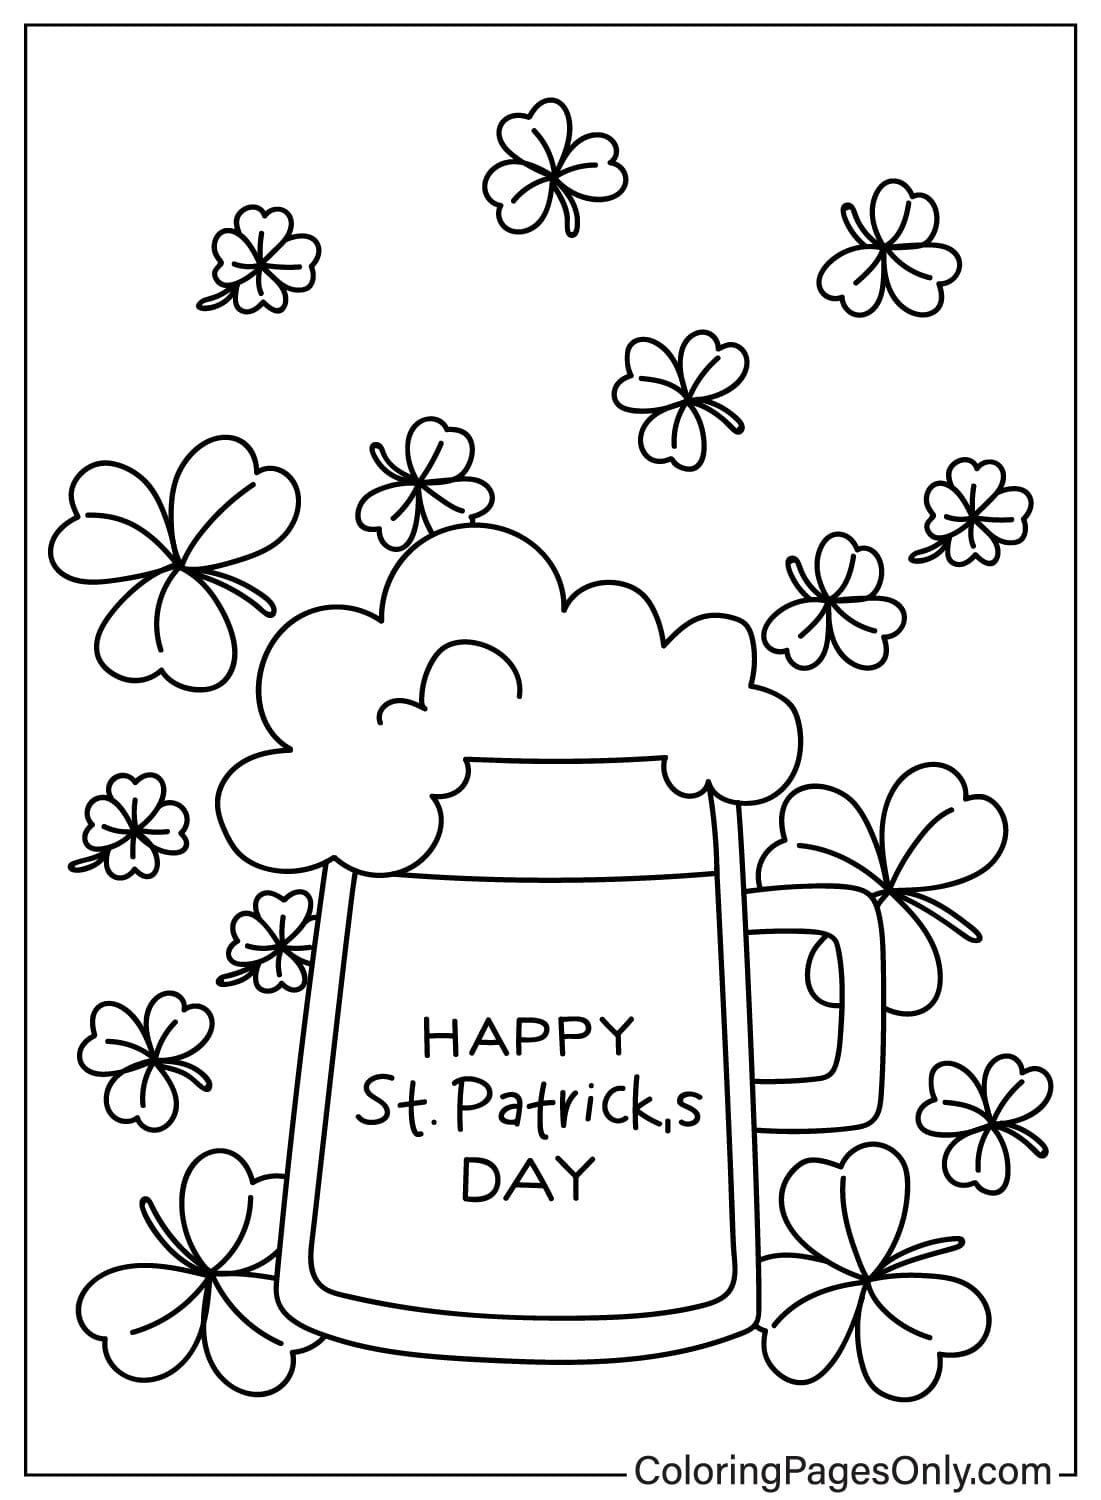 Happy St. Patricks Day Coloring Book from Happy St. Patrick's Day